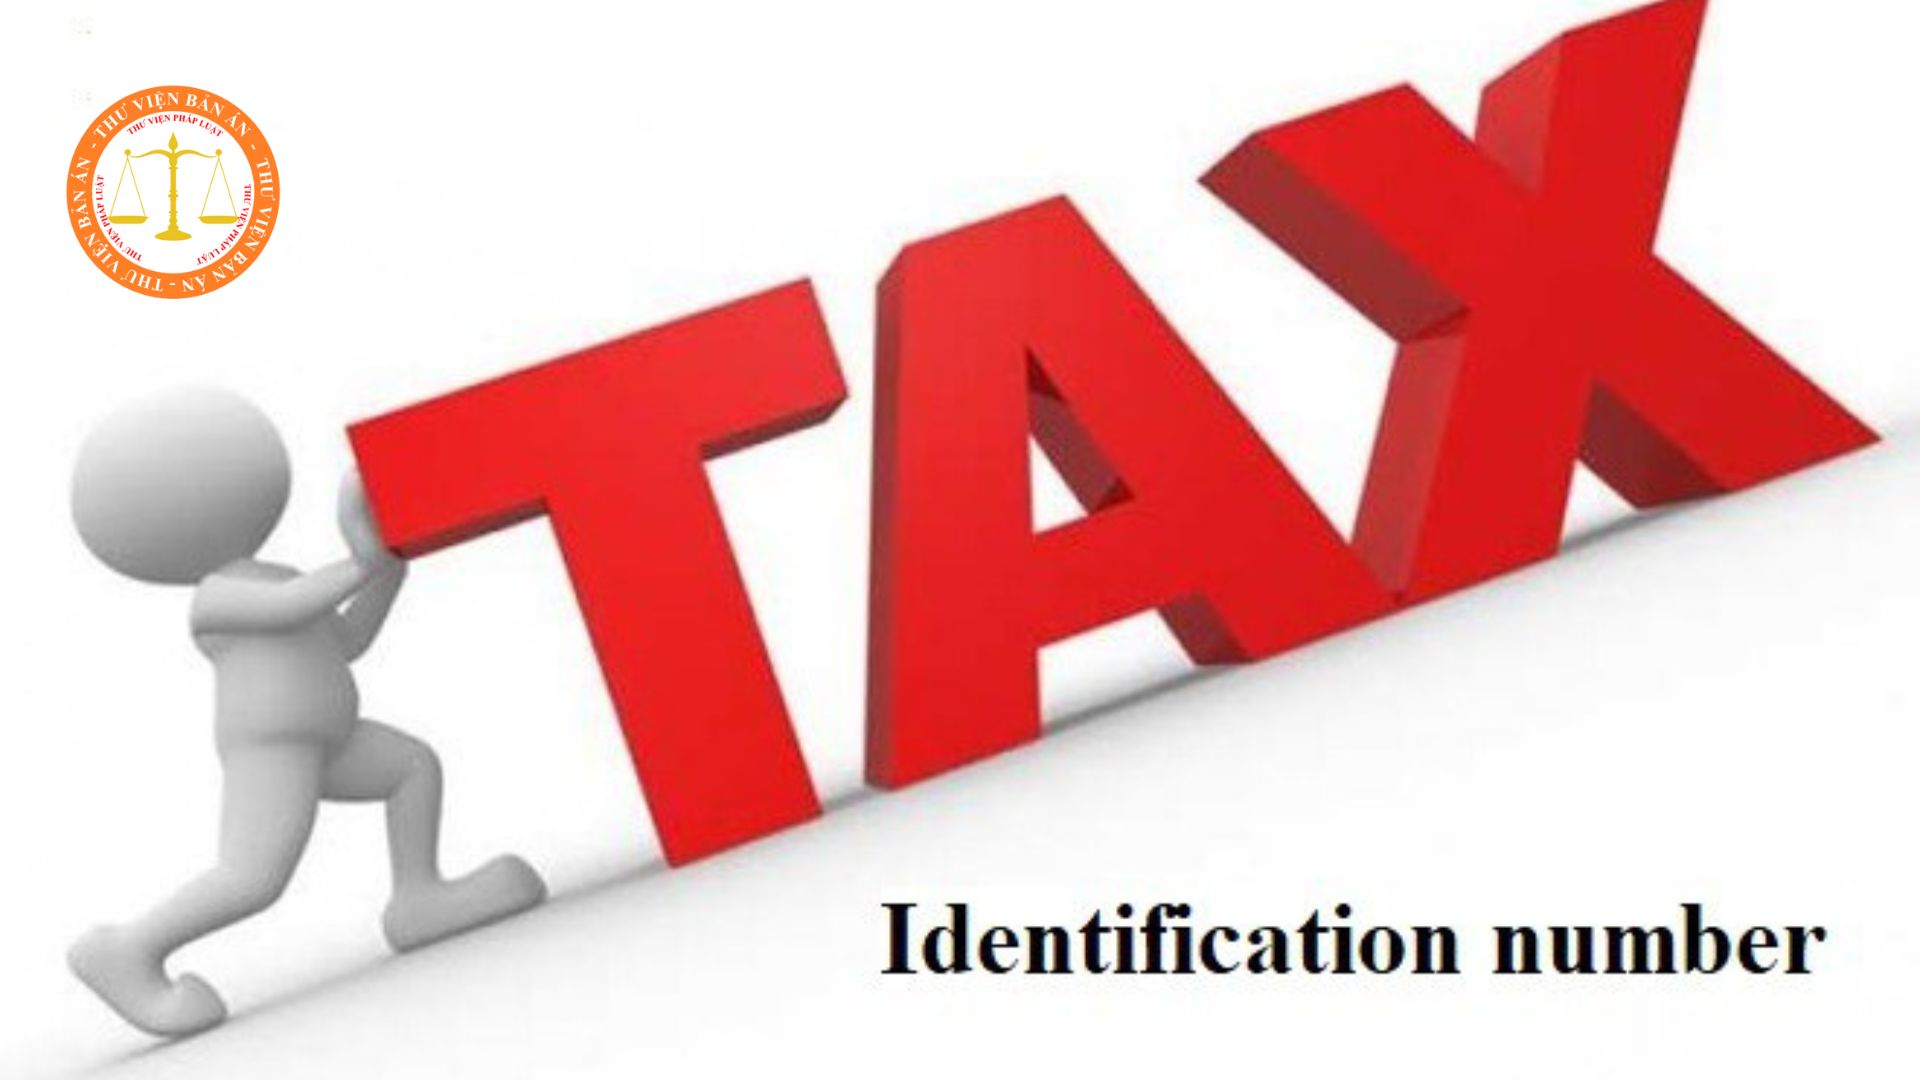 What is "Mã số thuế" in English? Is a business code also a tax identification number under the law in Vietnam?